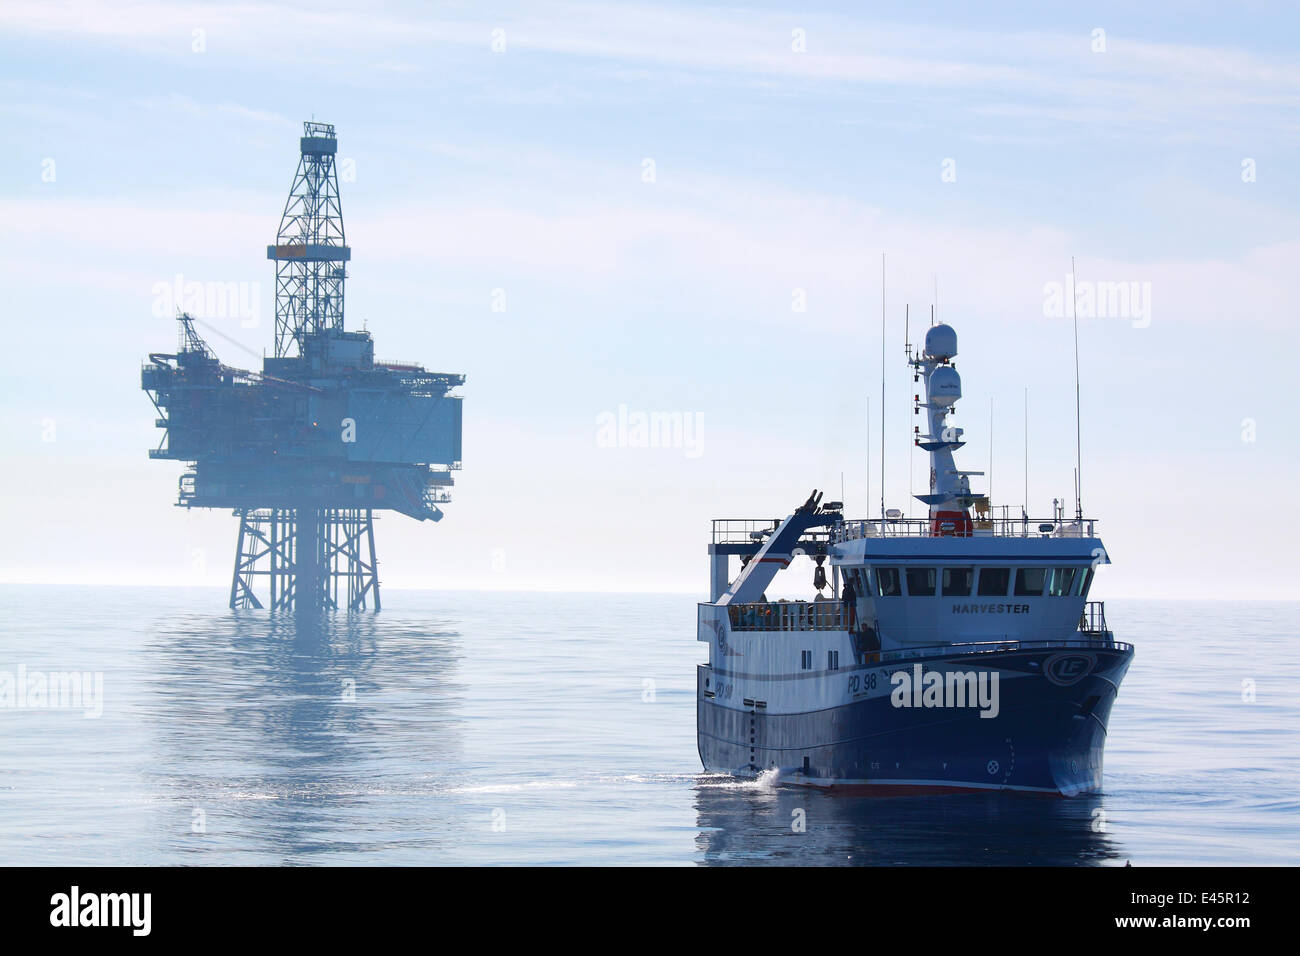 Fishing vessel 'Harvester' and the 'Jotun B' oil production platform. North Sea, May 2010. Stock Photo